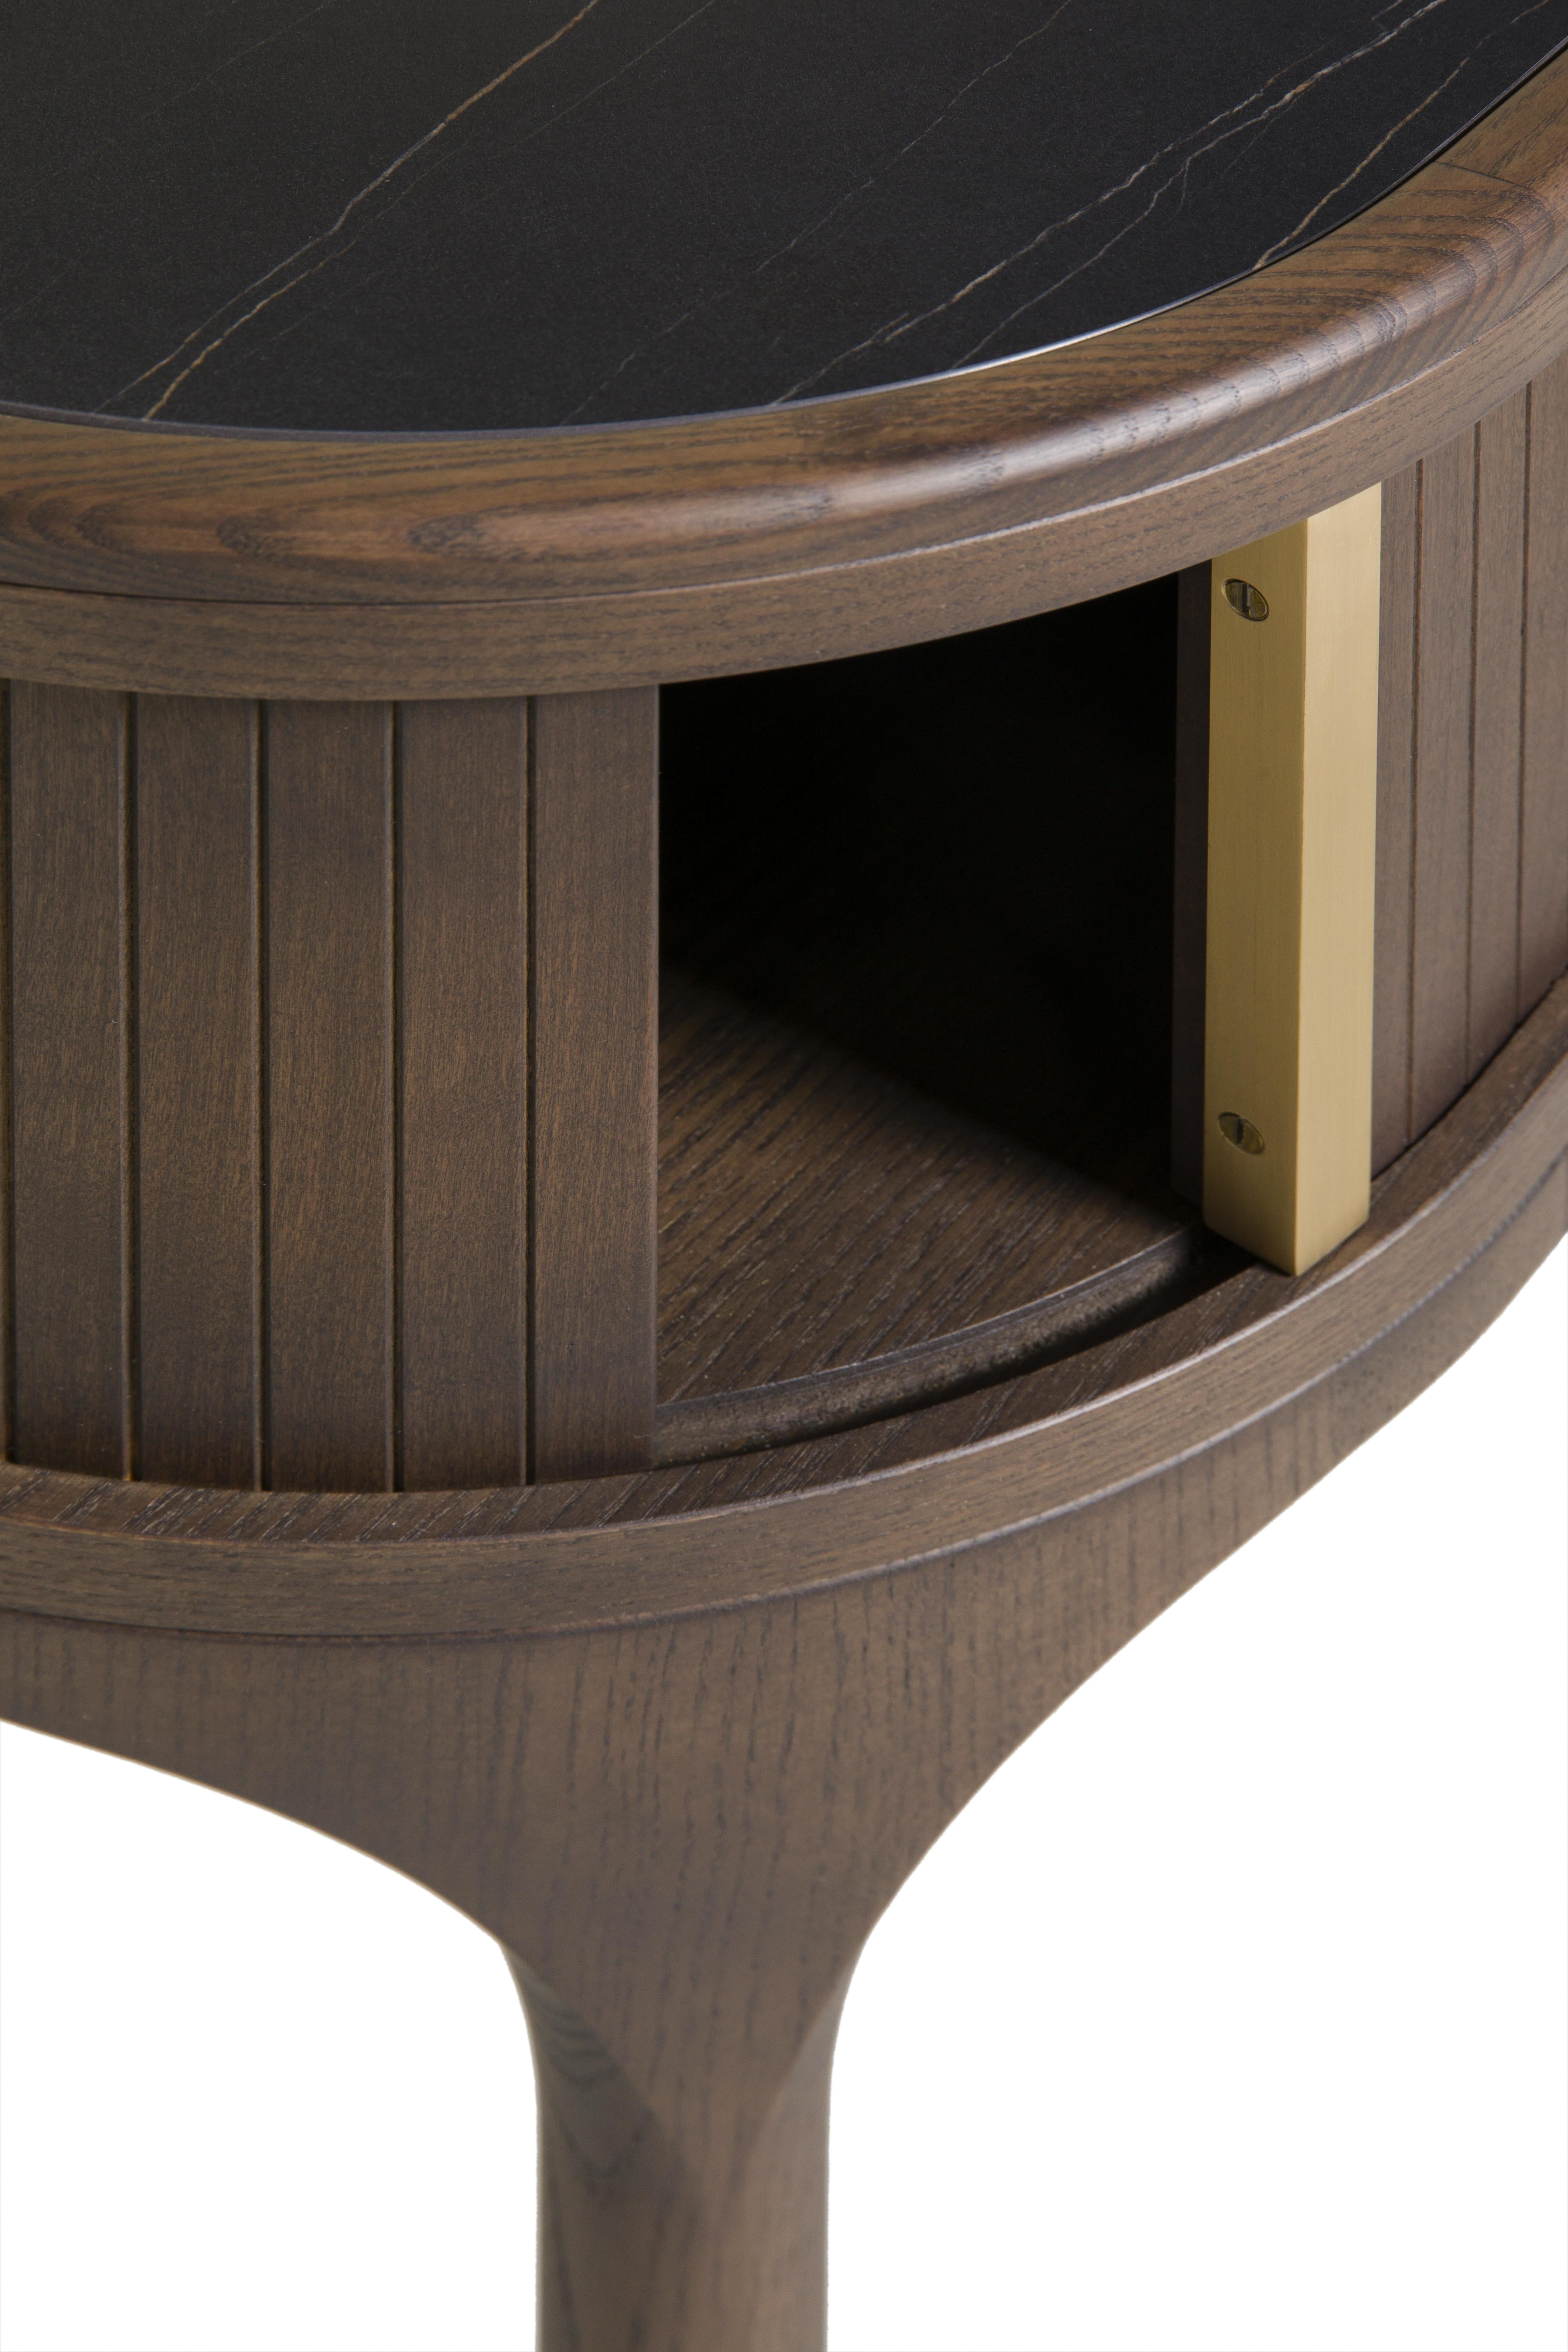 Ash wood bedside table with glass or marble top, a compartment closed by a sliding doorand brass handles. Shaped foot with brass cup.
Design Libero Rutilo

 